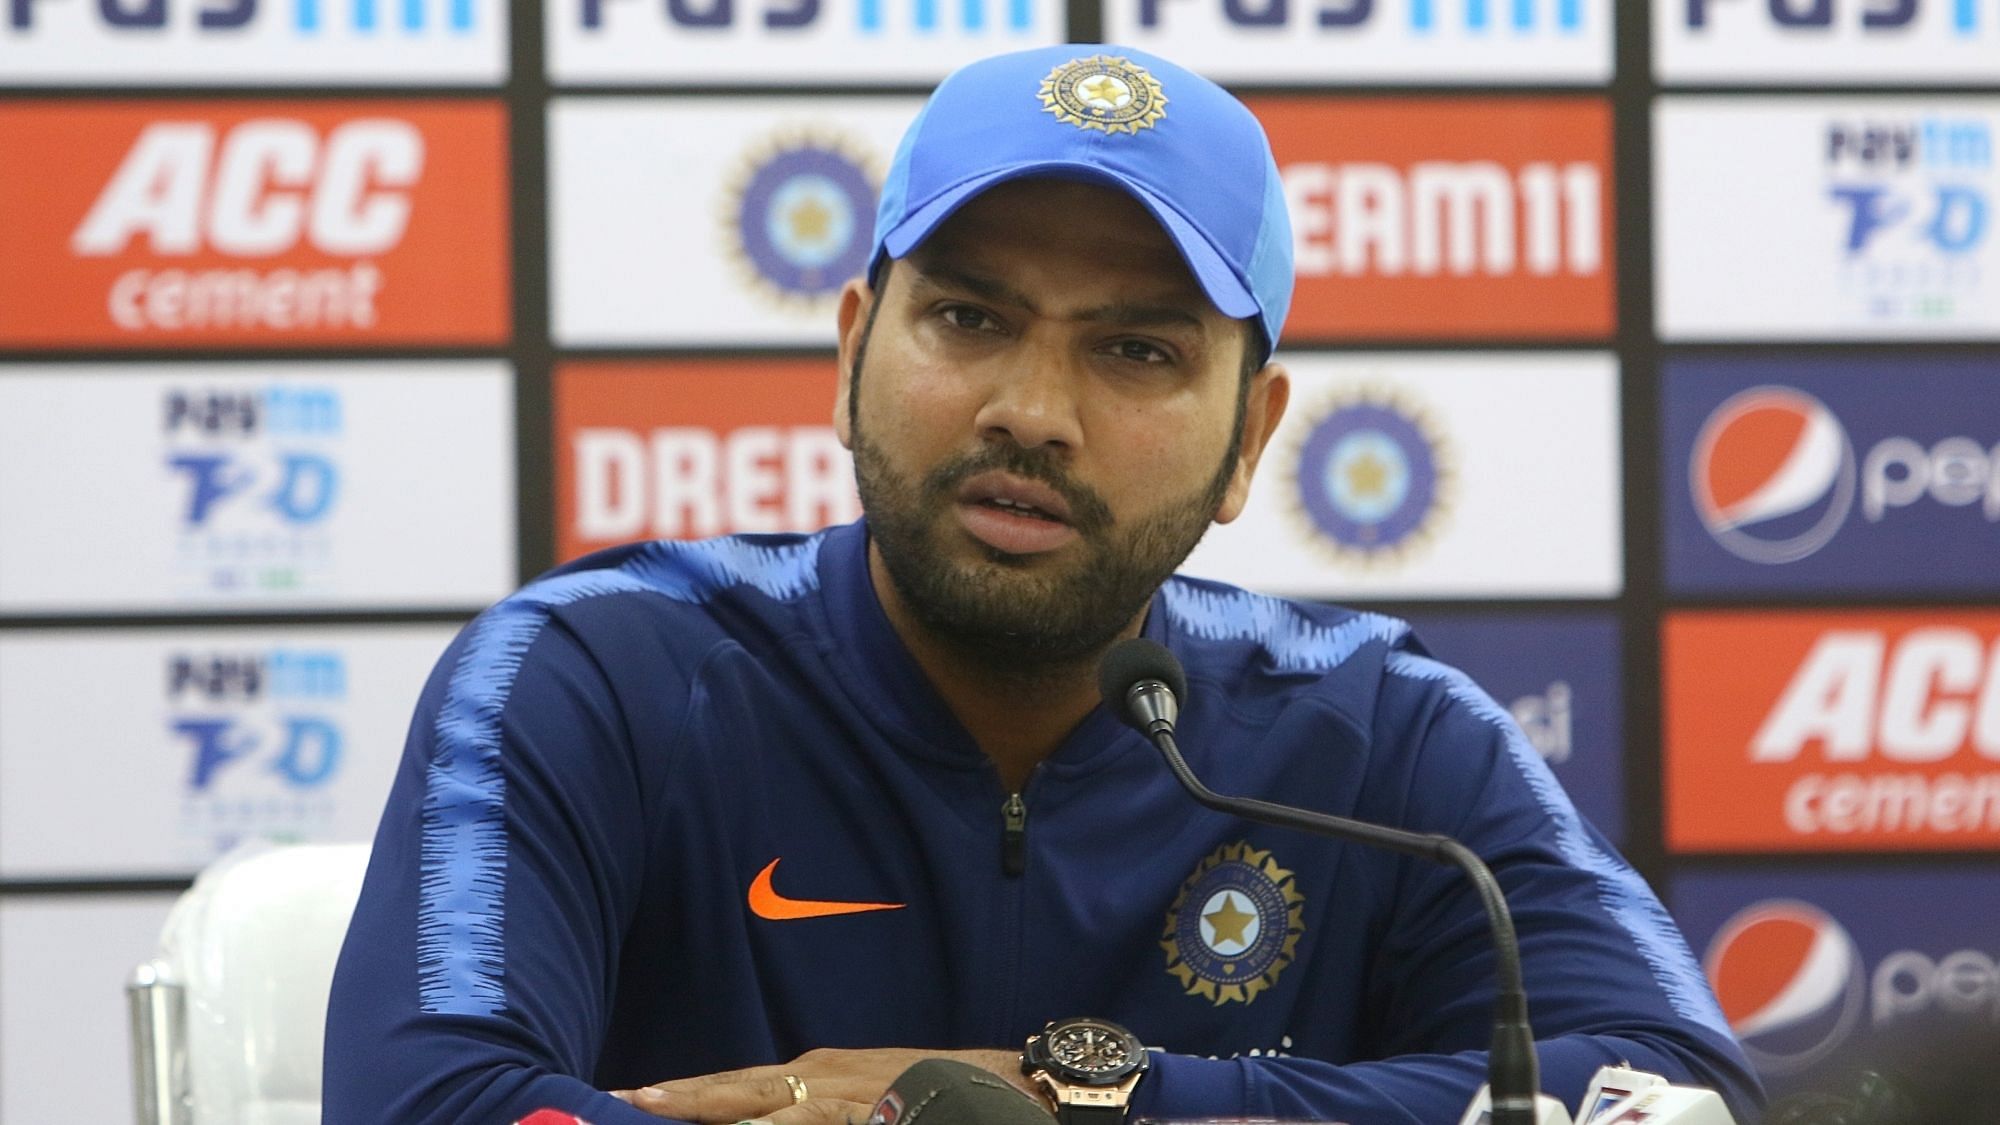 Rohit Sharma led the young Indian team to the field against Bangladesh.